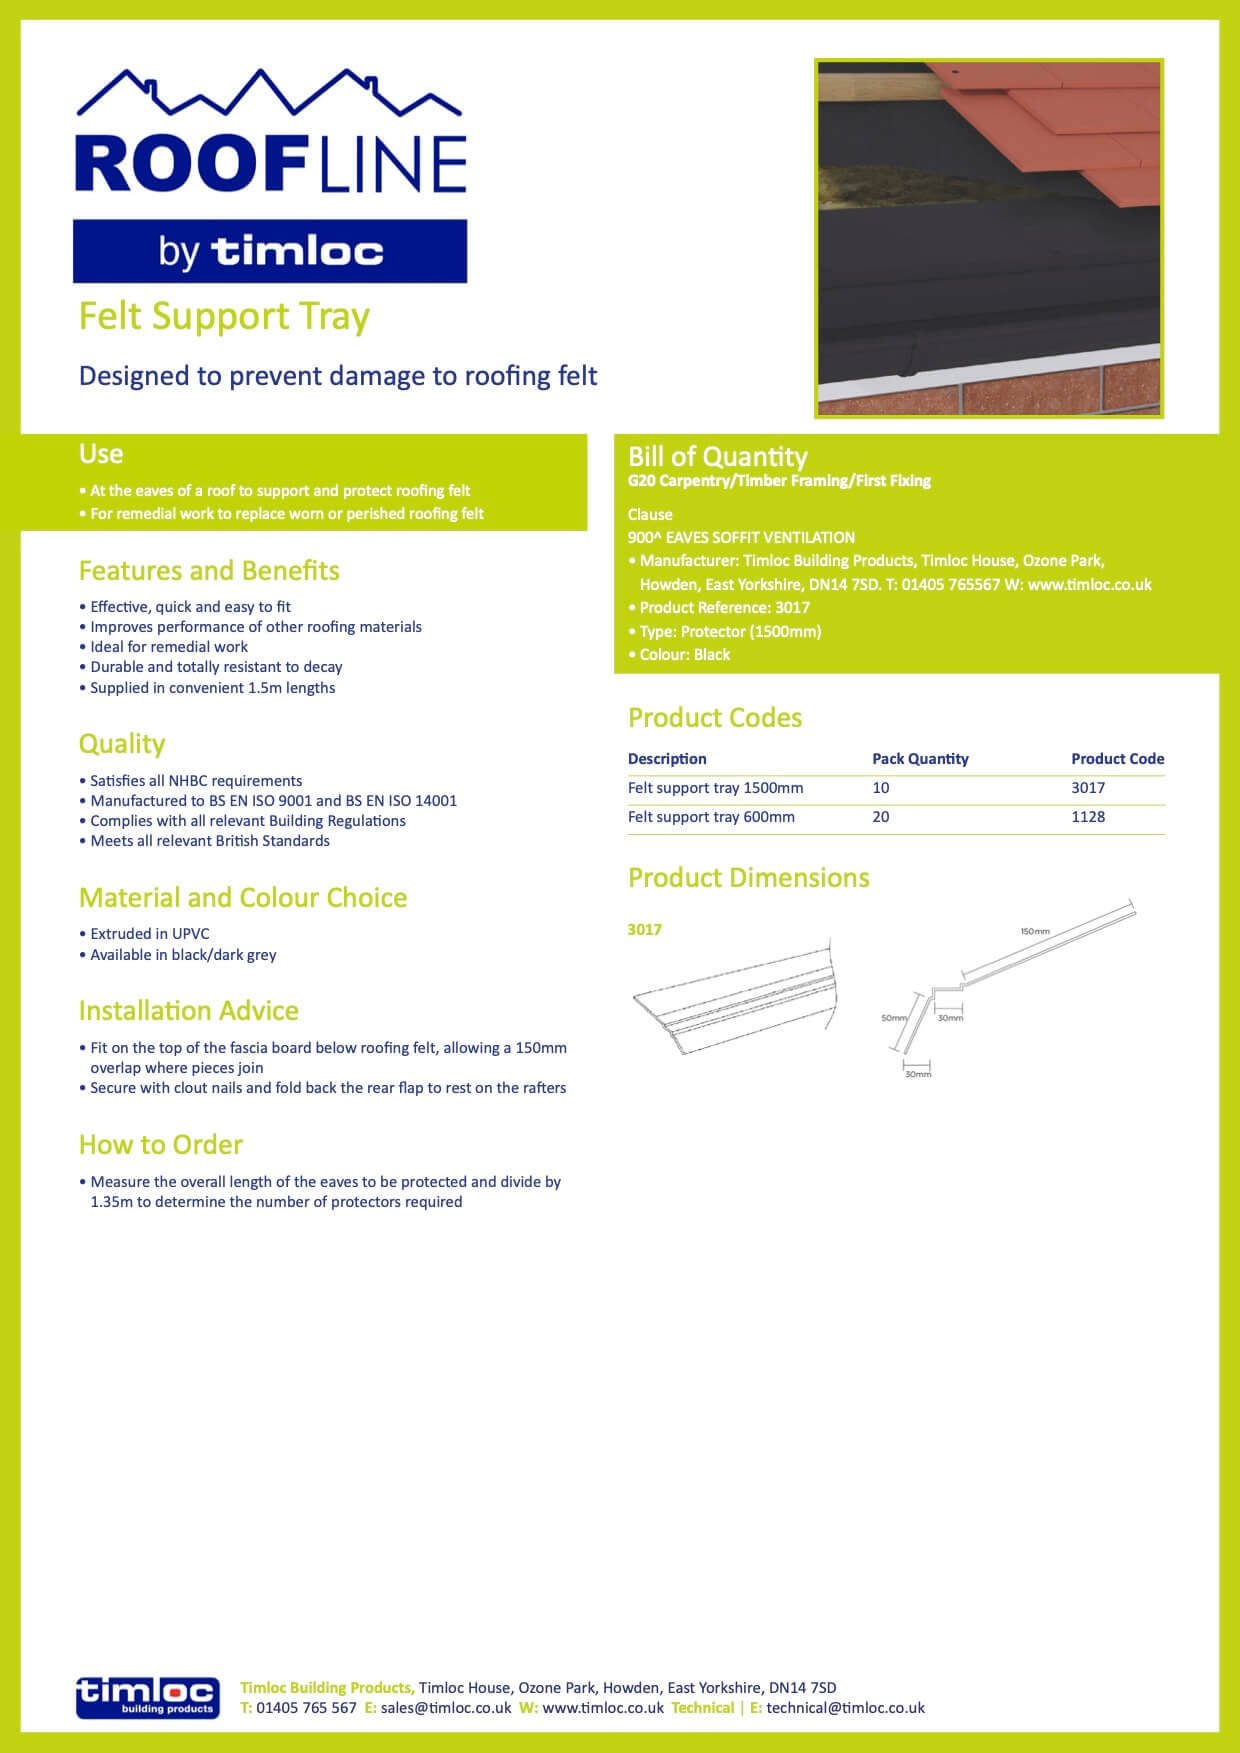 Timloc Building Products Datasheet - Felt Support Tray